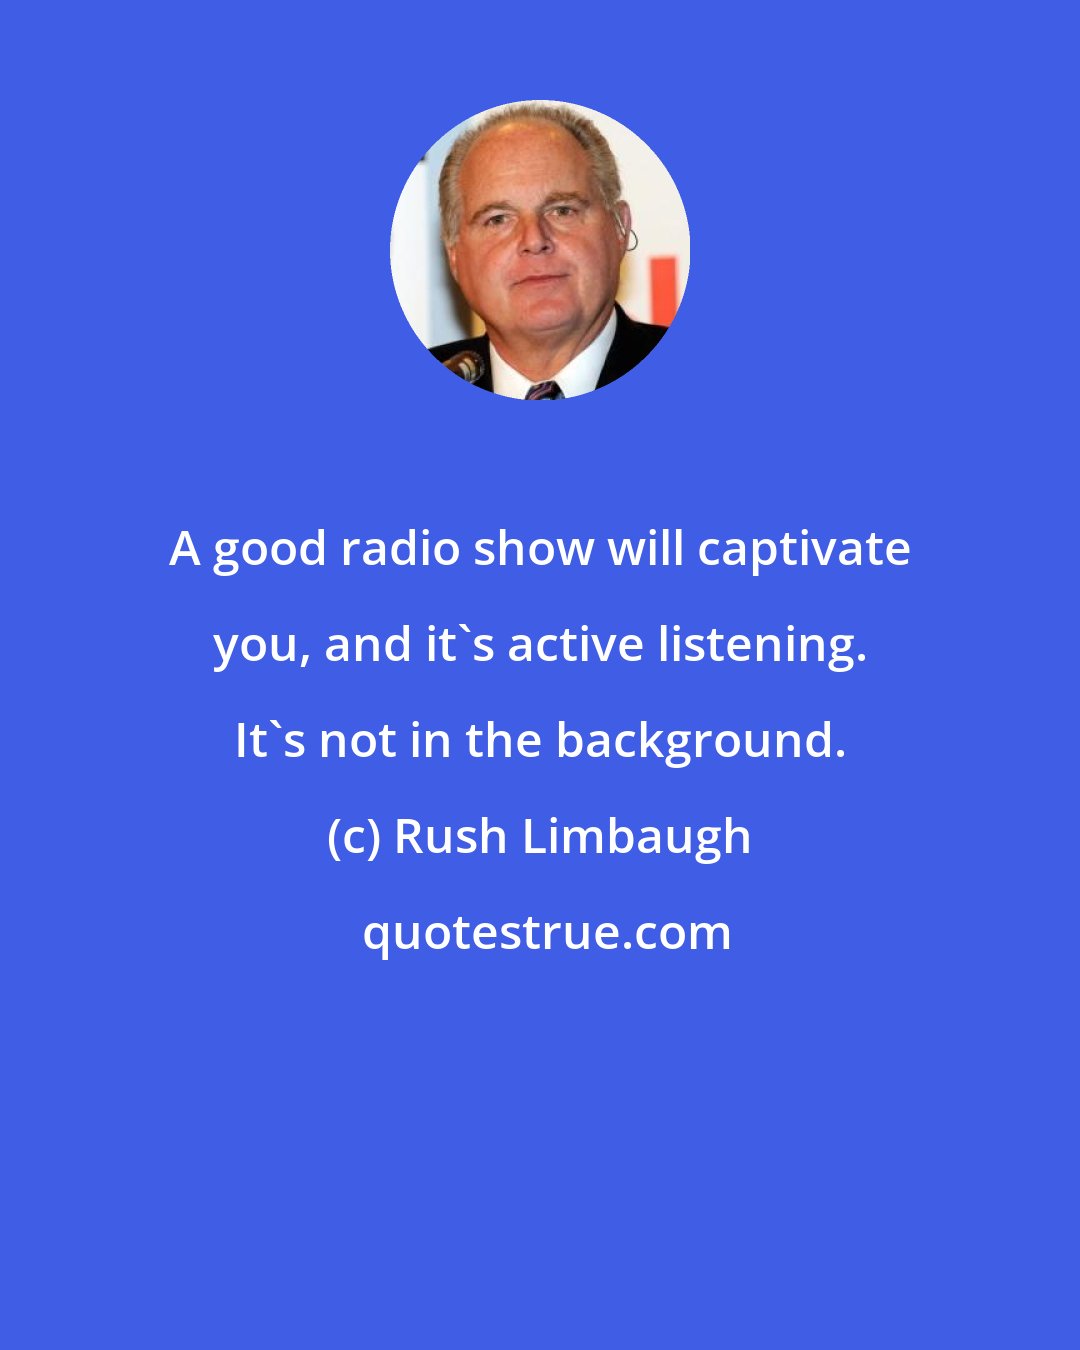 Rush Limbaugh: A good radio show will captivate you, and it's active listening. It's not in the background.